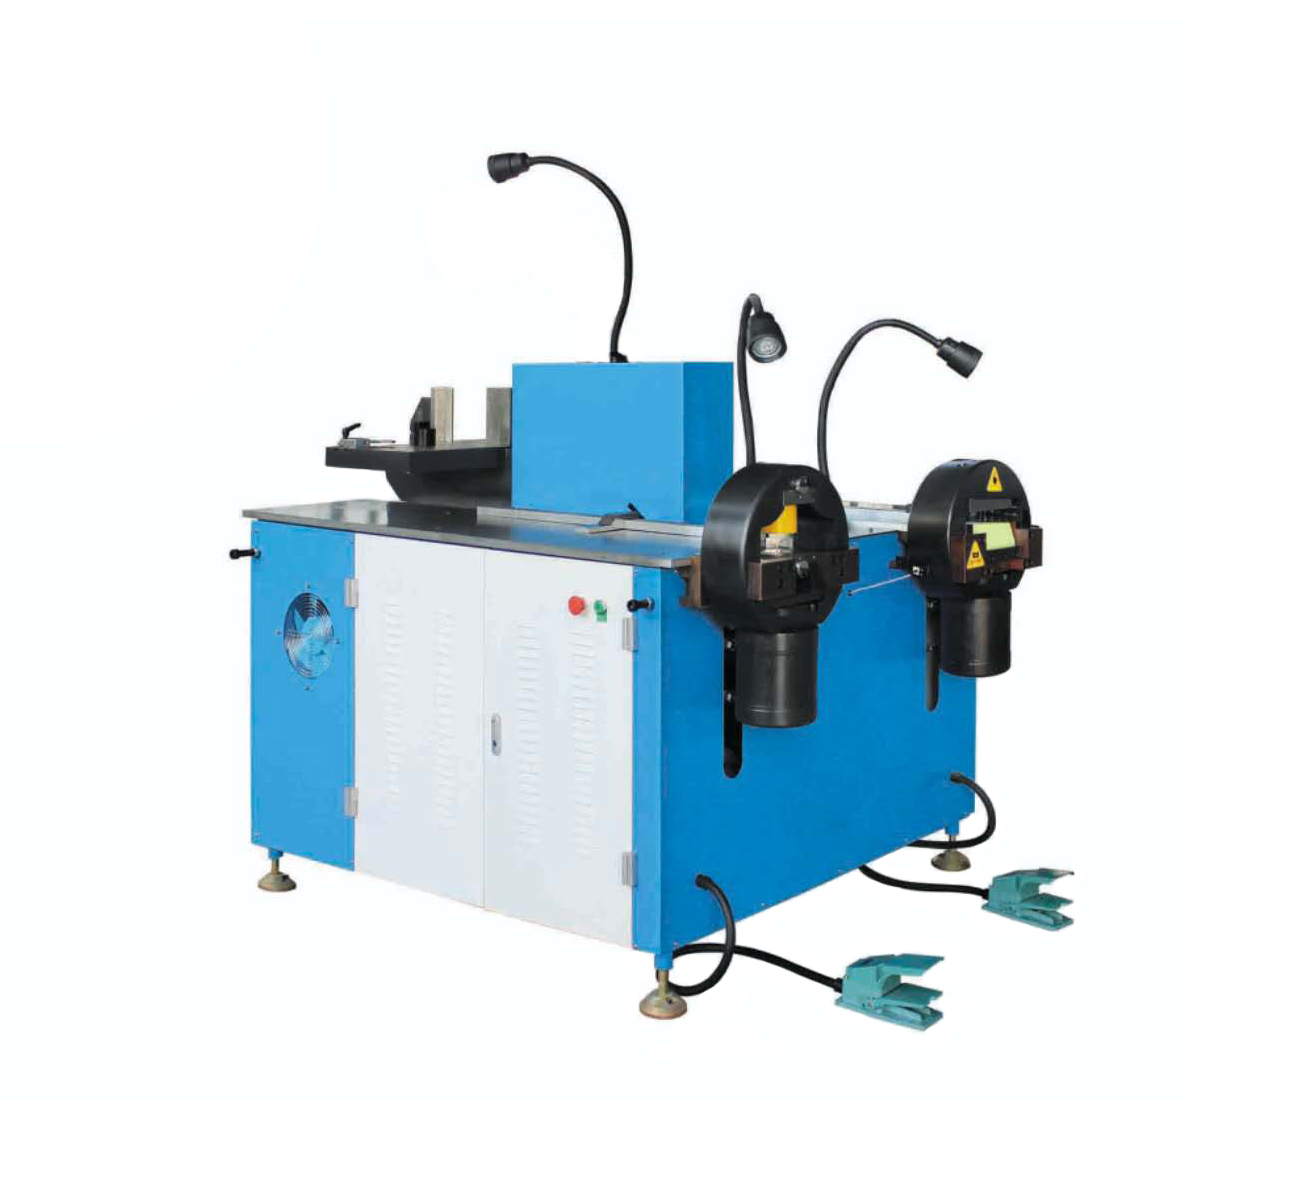 China Wholesale 8mm Bending Spring Suppliers - Good Quality China Factory Sale Various Multi-Function Machine Press Briqueting Hydraulic Scrap Metal Used Car Baler for Sale  – Gaoji